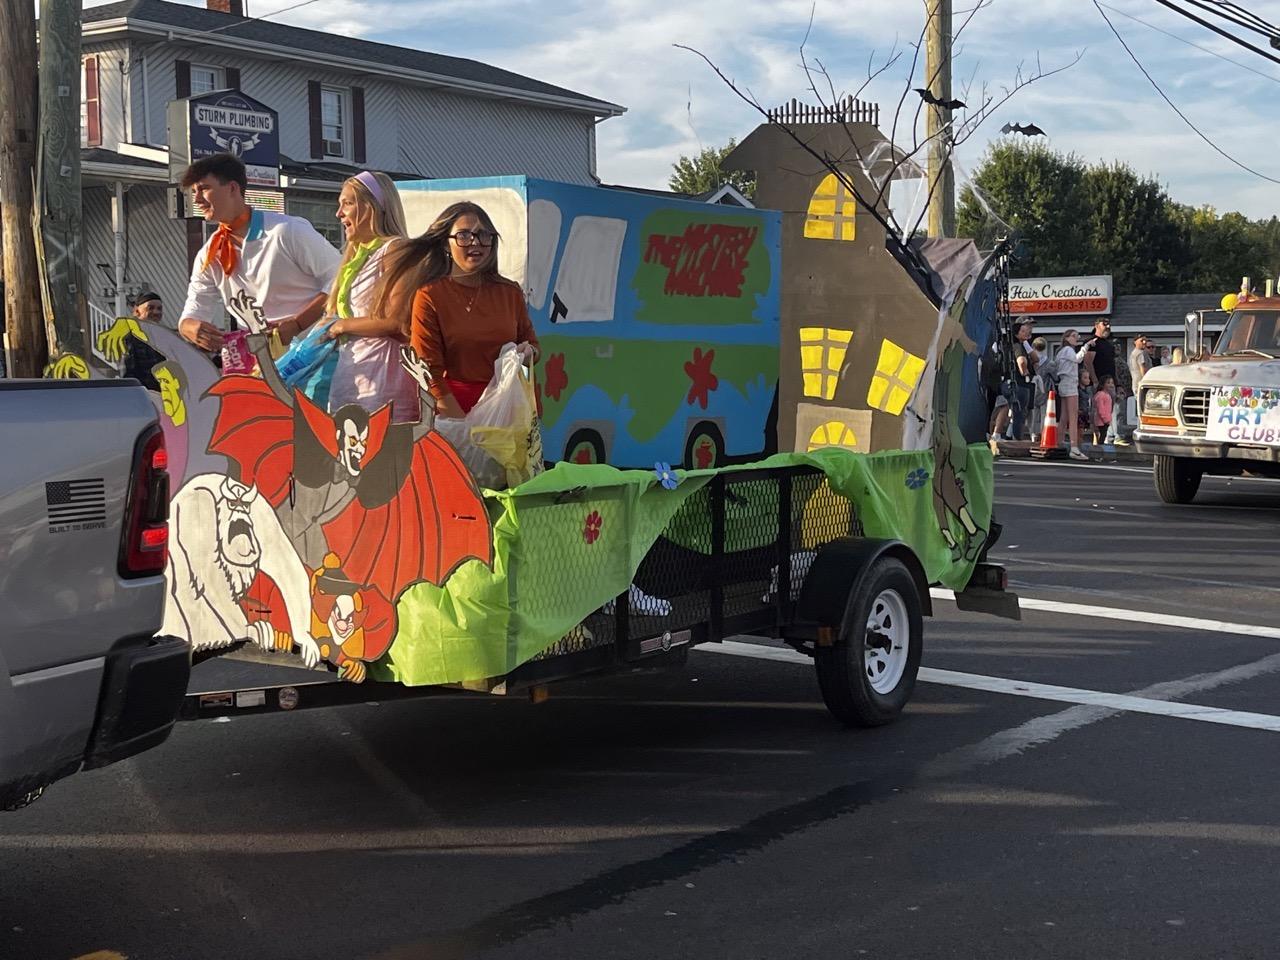 The Junior Class won ‘Best in Show’ for their “Scooby Doo” float